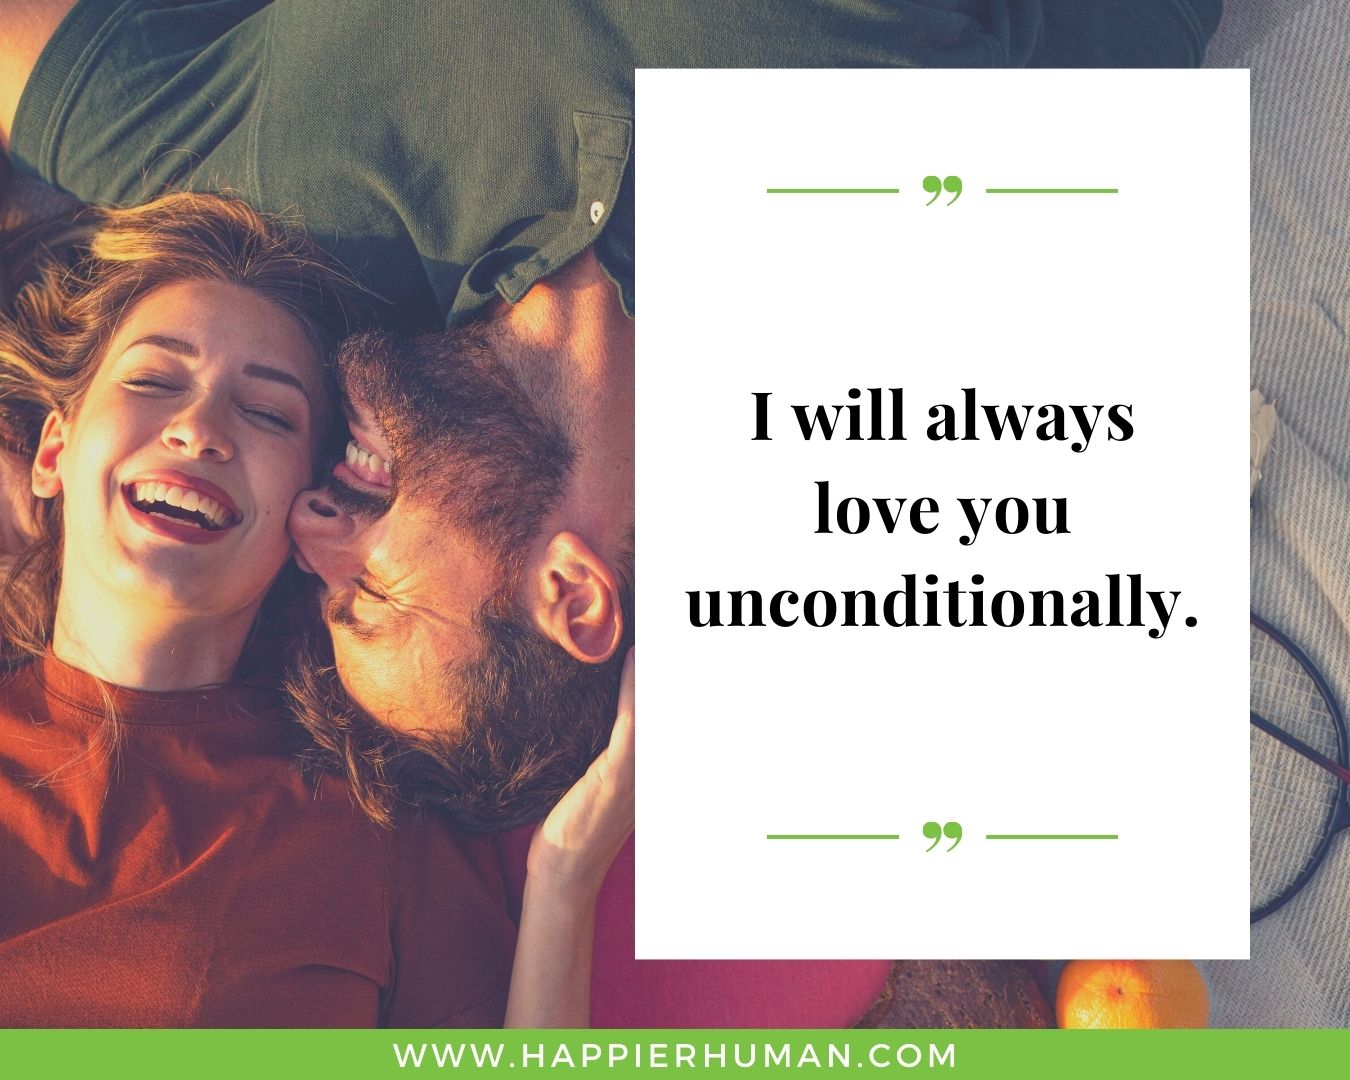 Unconditional Love Quotes for Her - “I will always love you uncondtionally. ”